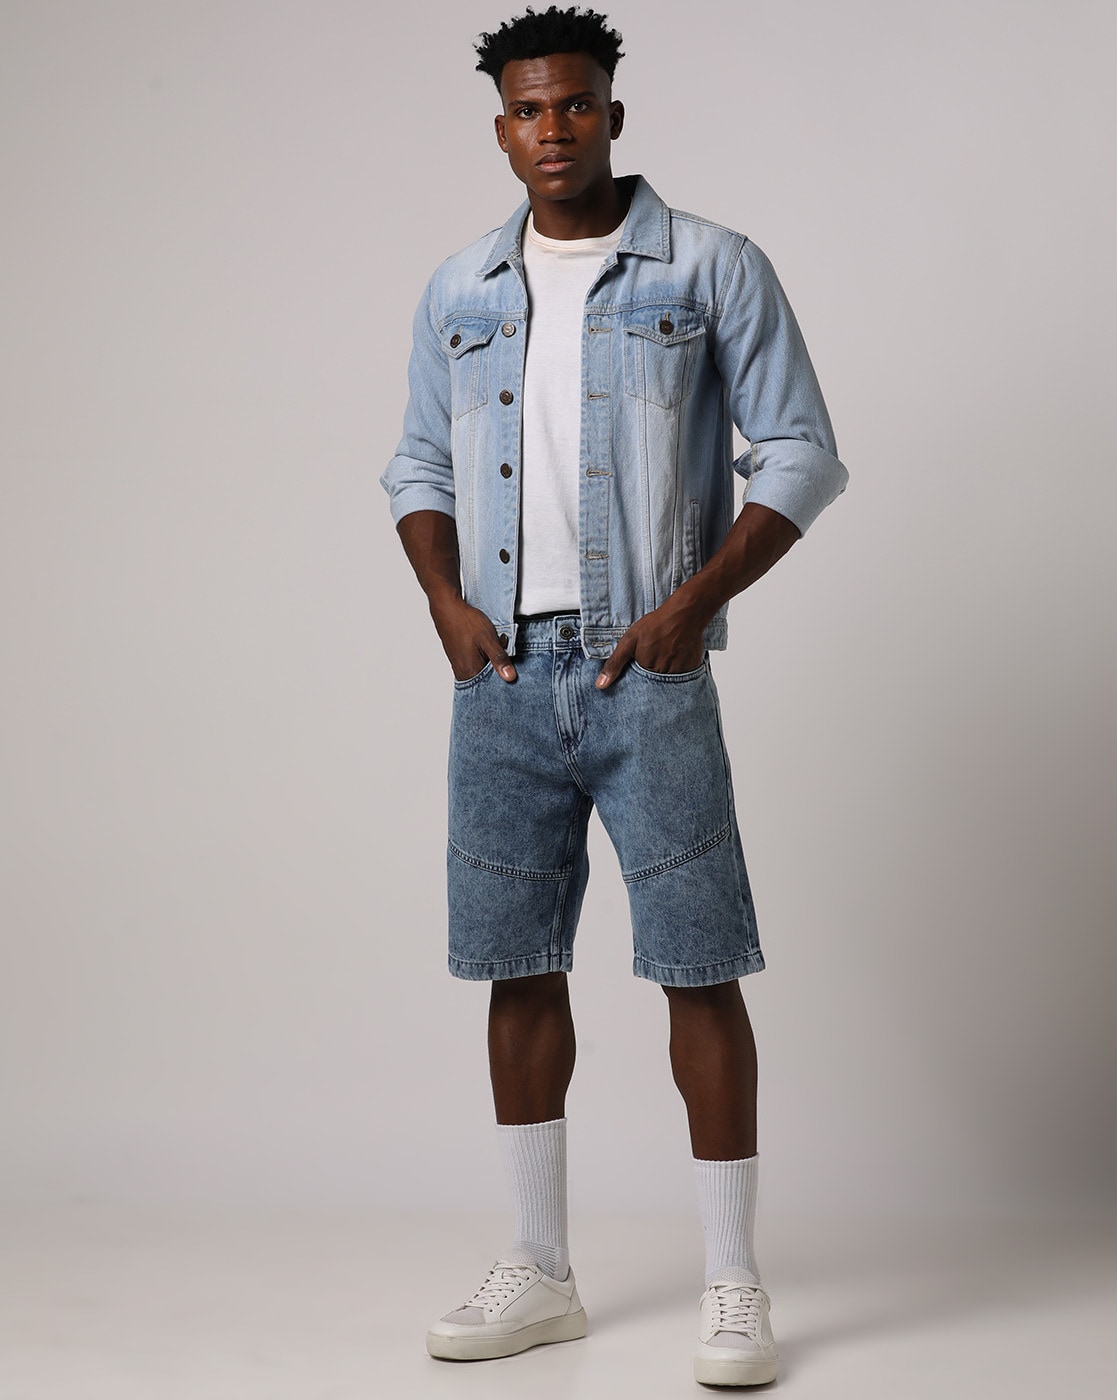 Tan Shorts with Denim Jacket Outfits For Men (12 ideas & outfits) |  Lookastic